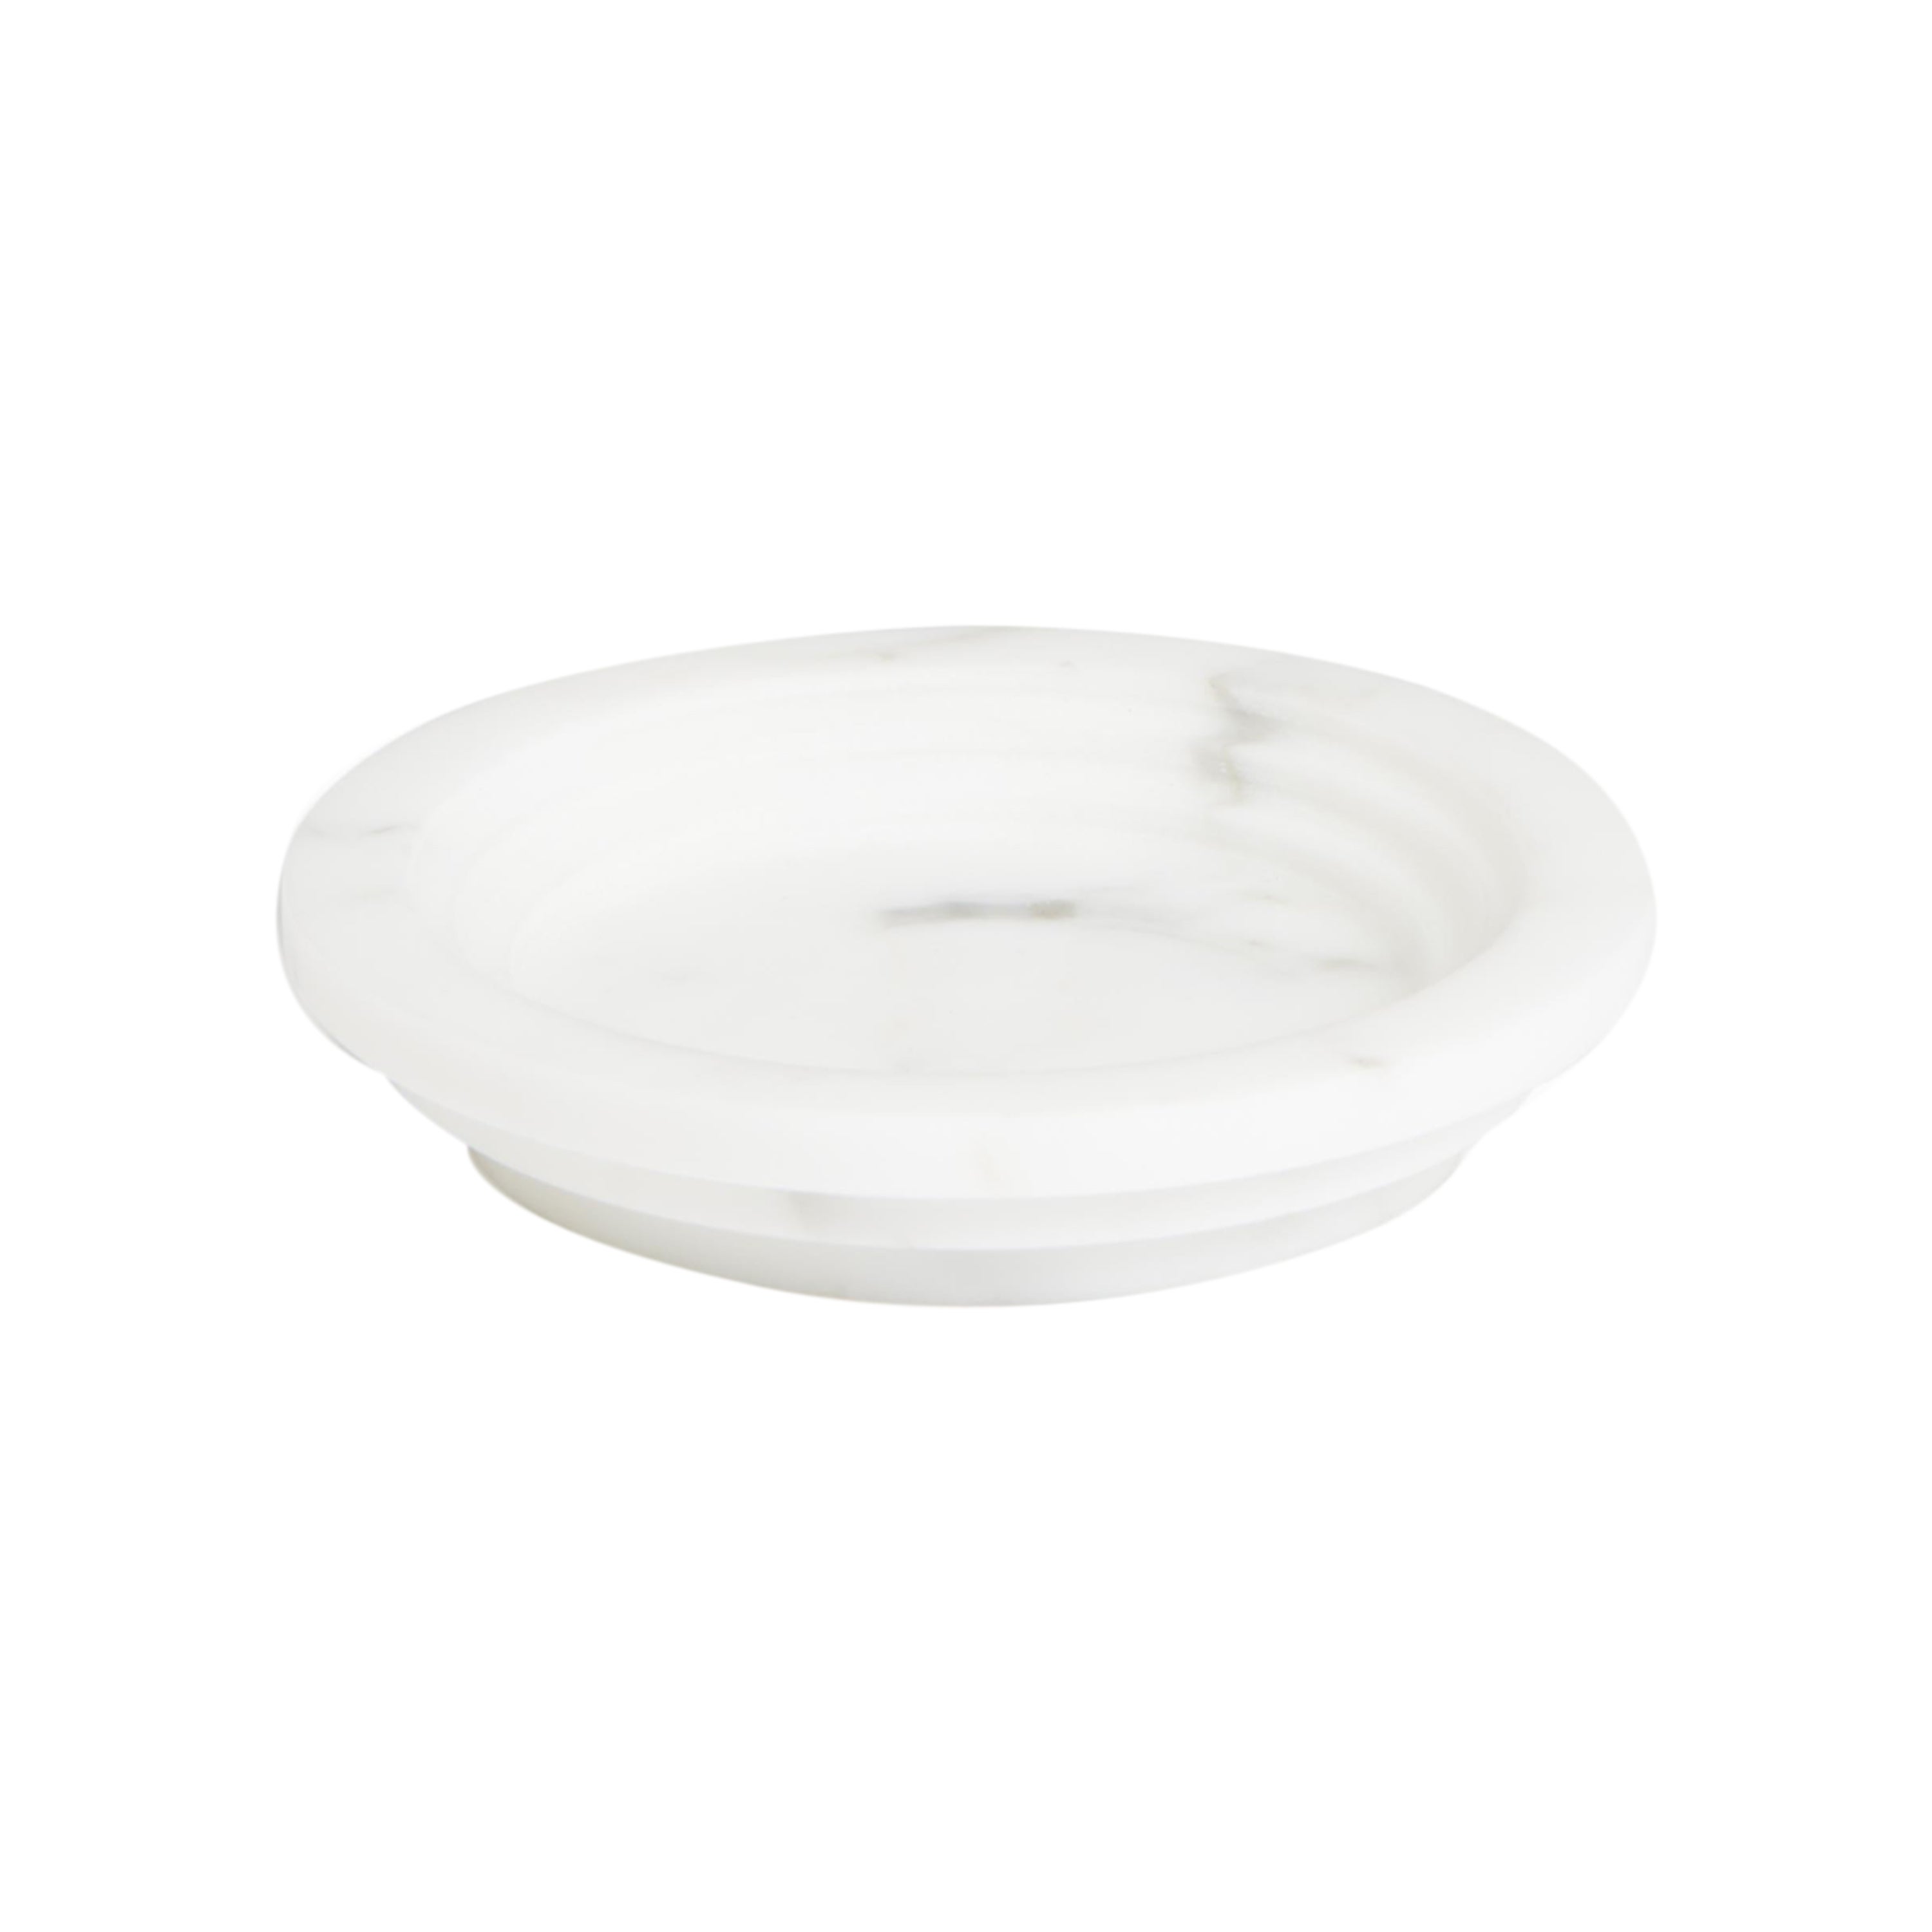 Guggenheim Round Ashtray by Michele Chiossi